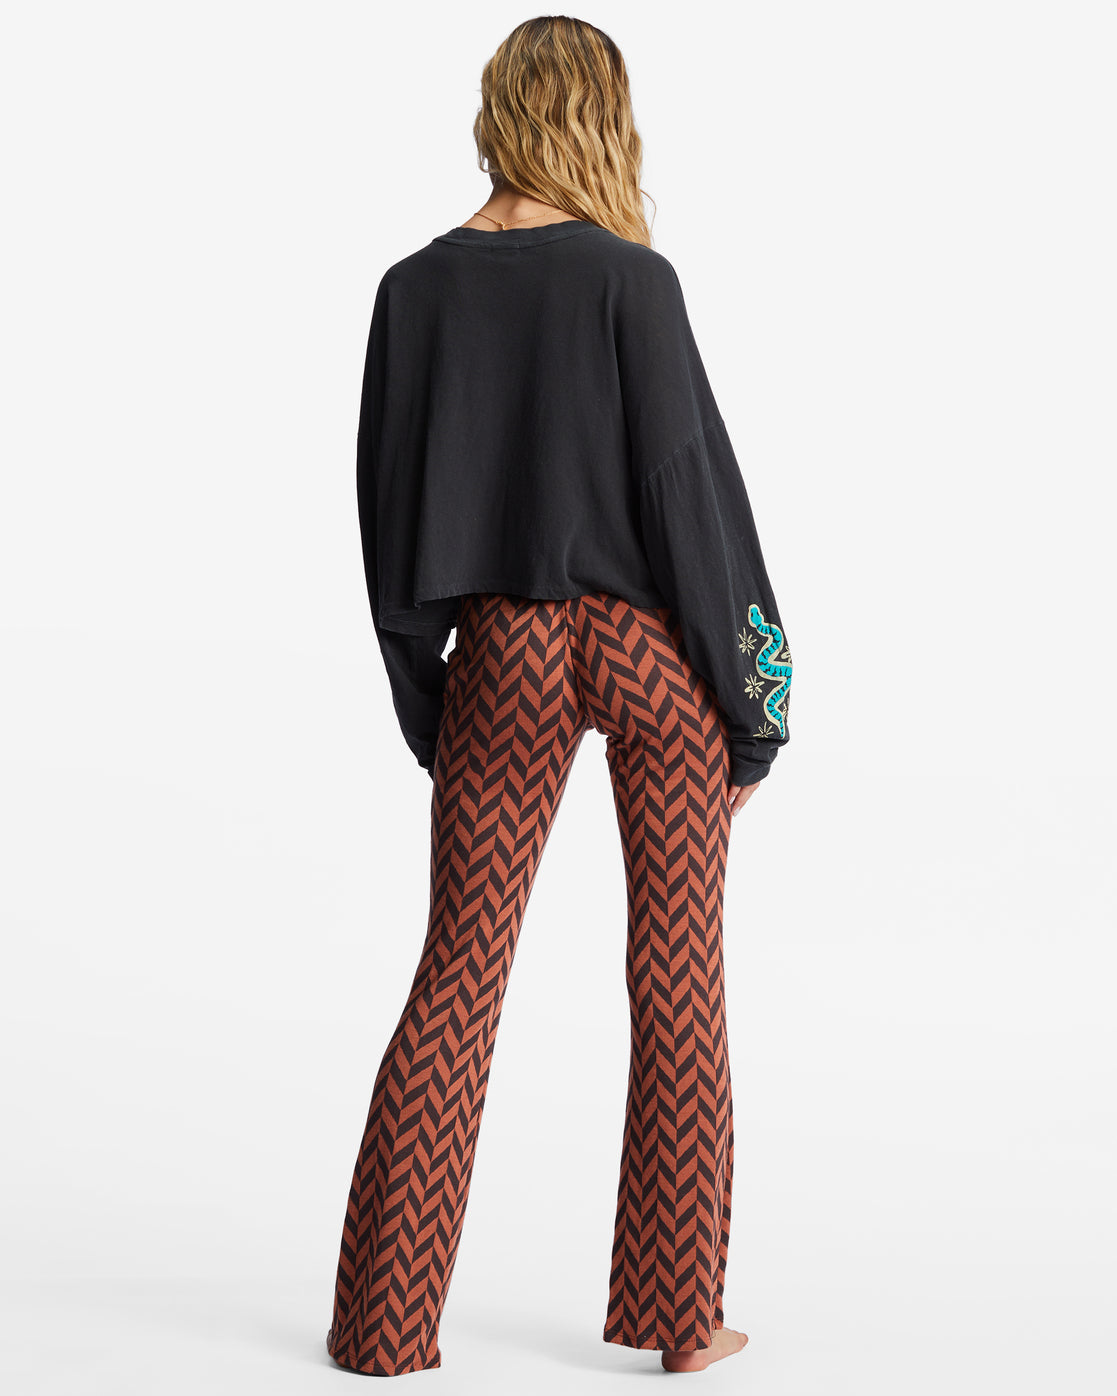 New Heights Flared Pants - ABJNP00331